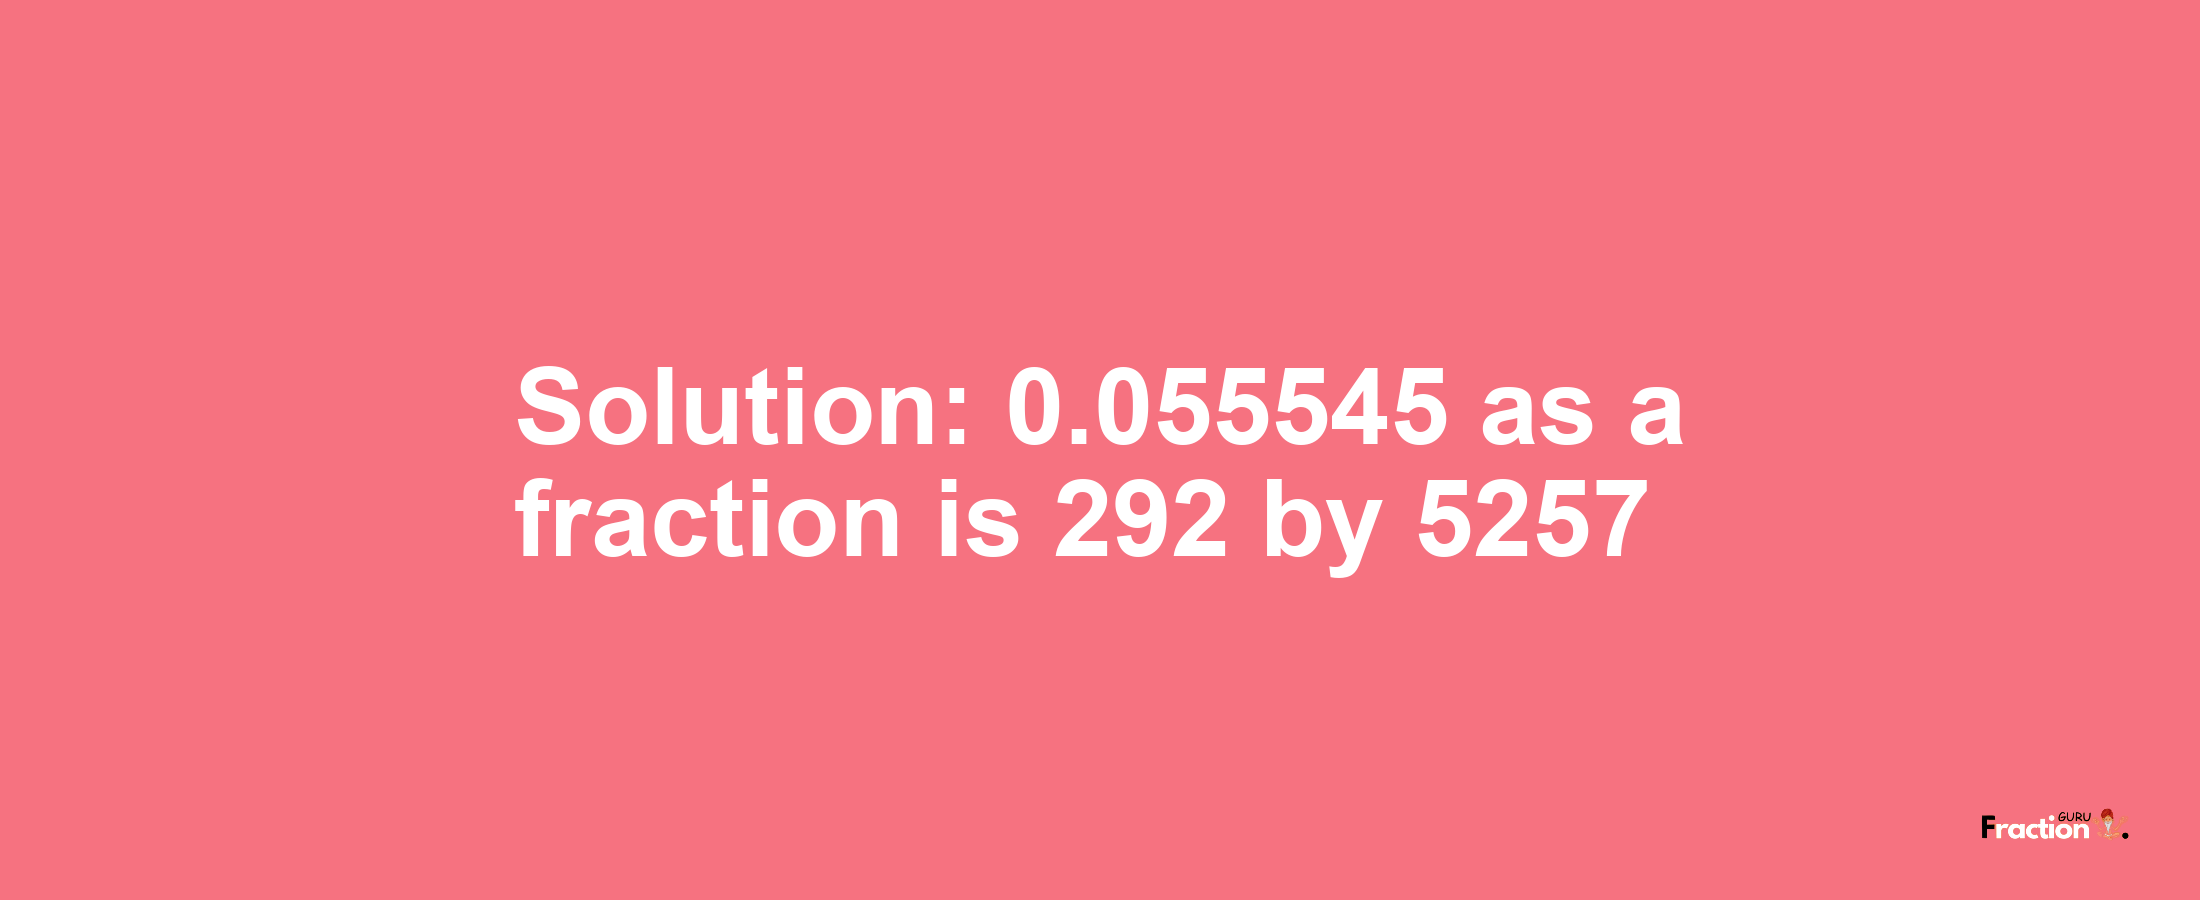 Solution:0.055545 as a fraction is 292/5257